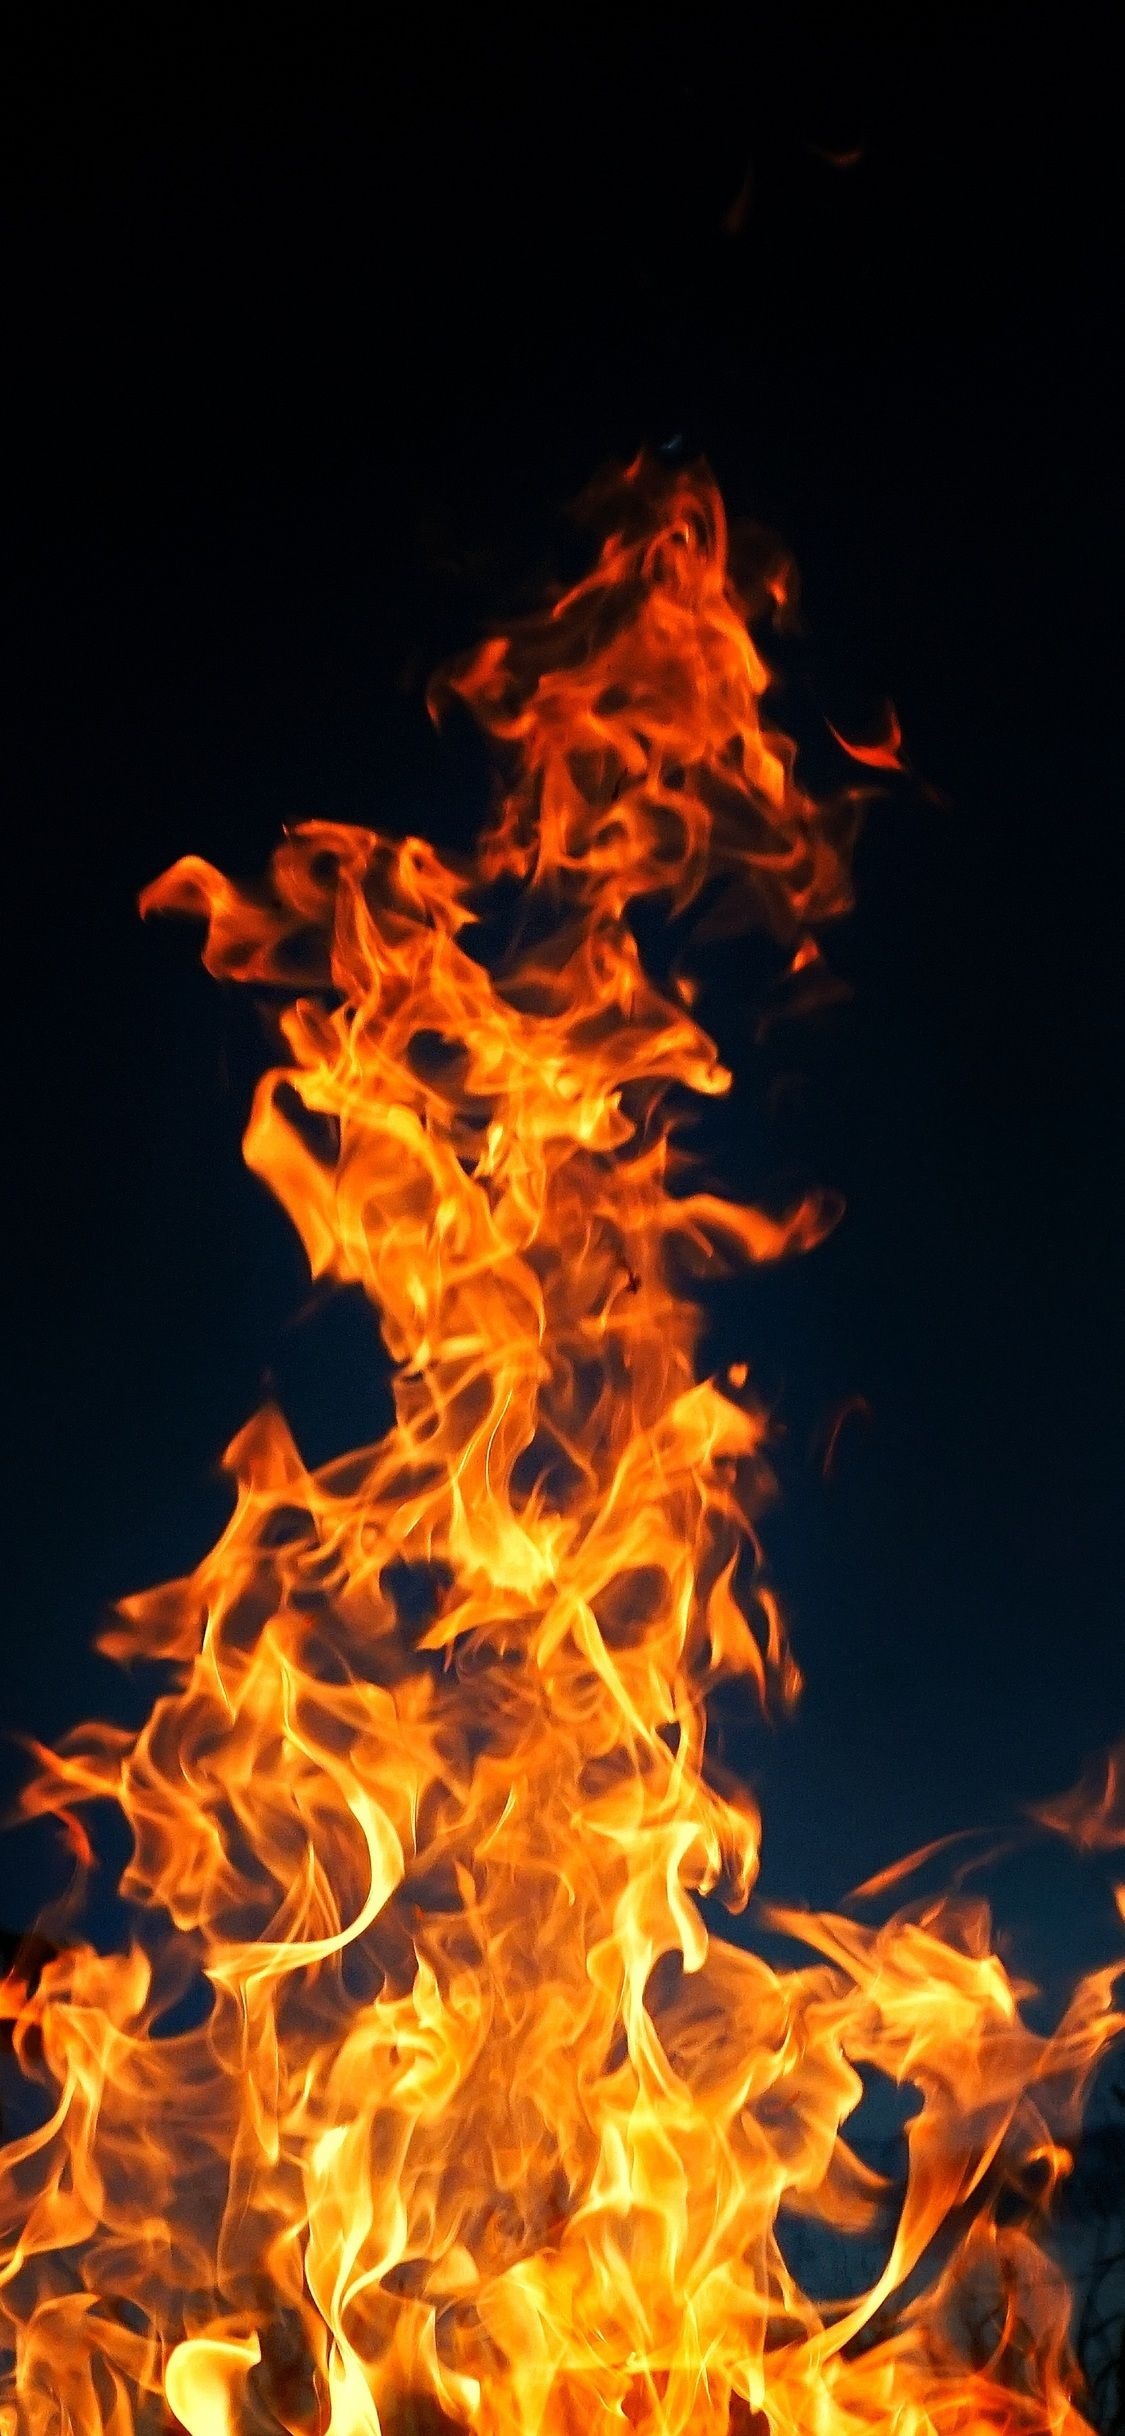 iPhone fire, Flaming backgrounds, Burning wallpapers, Sizzling visuals, Ignited screens, 1130x2440 HD Phone